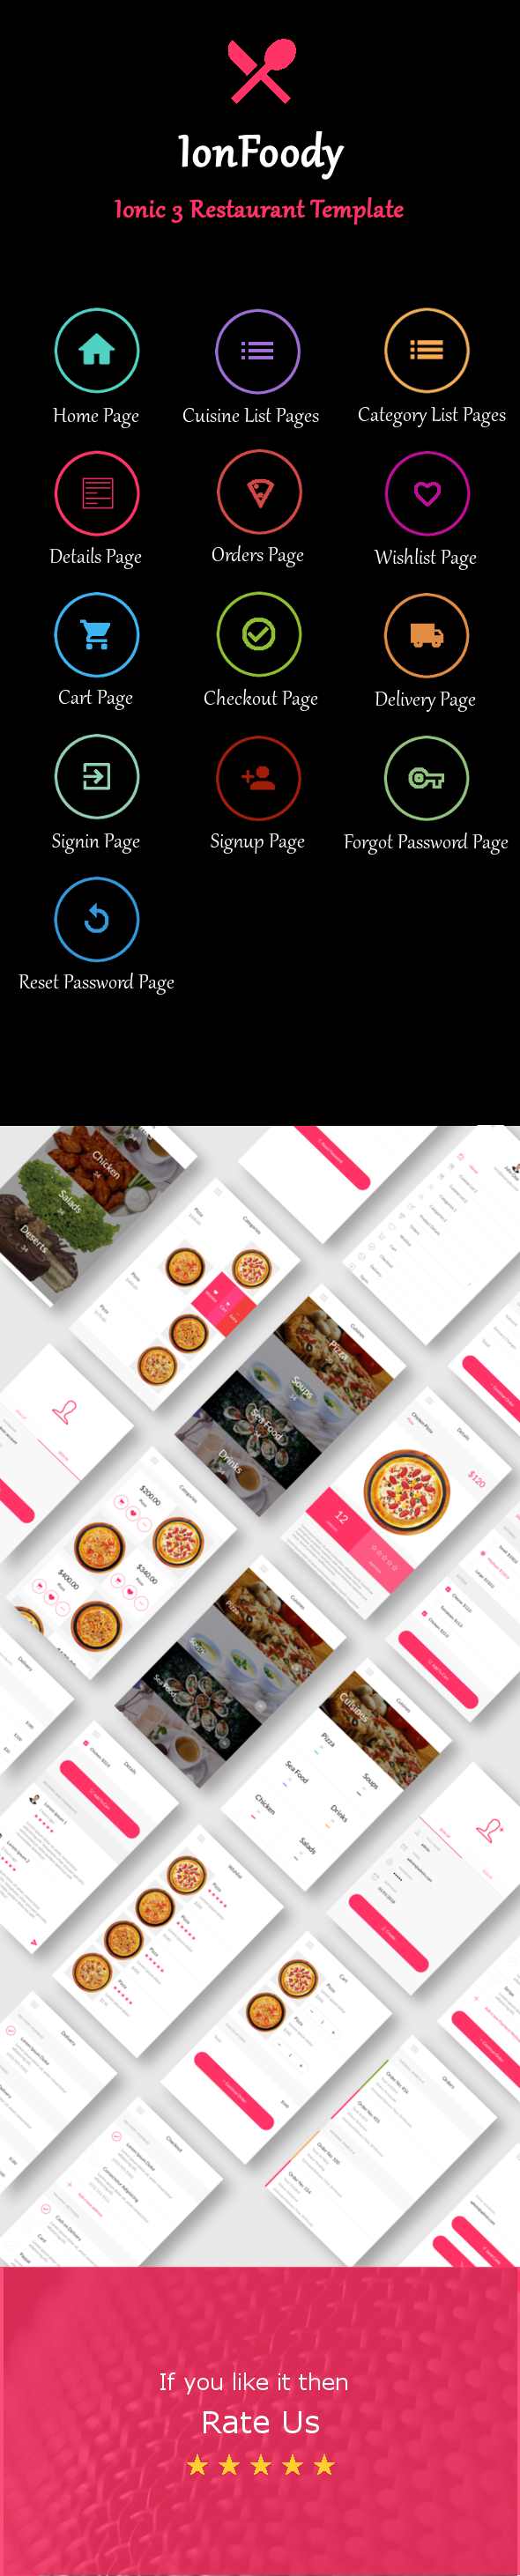 IonFoody - Ionic 3 Restaurant Template - 2